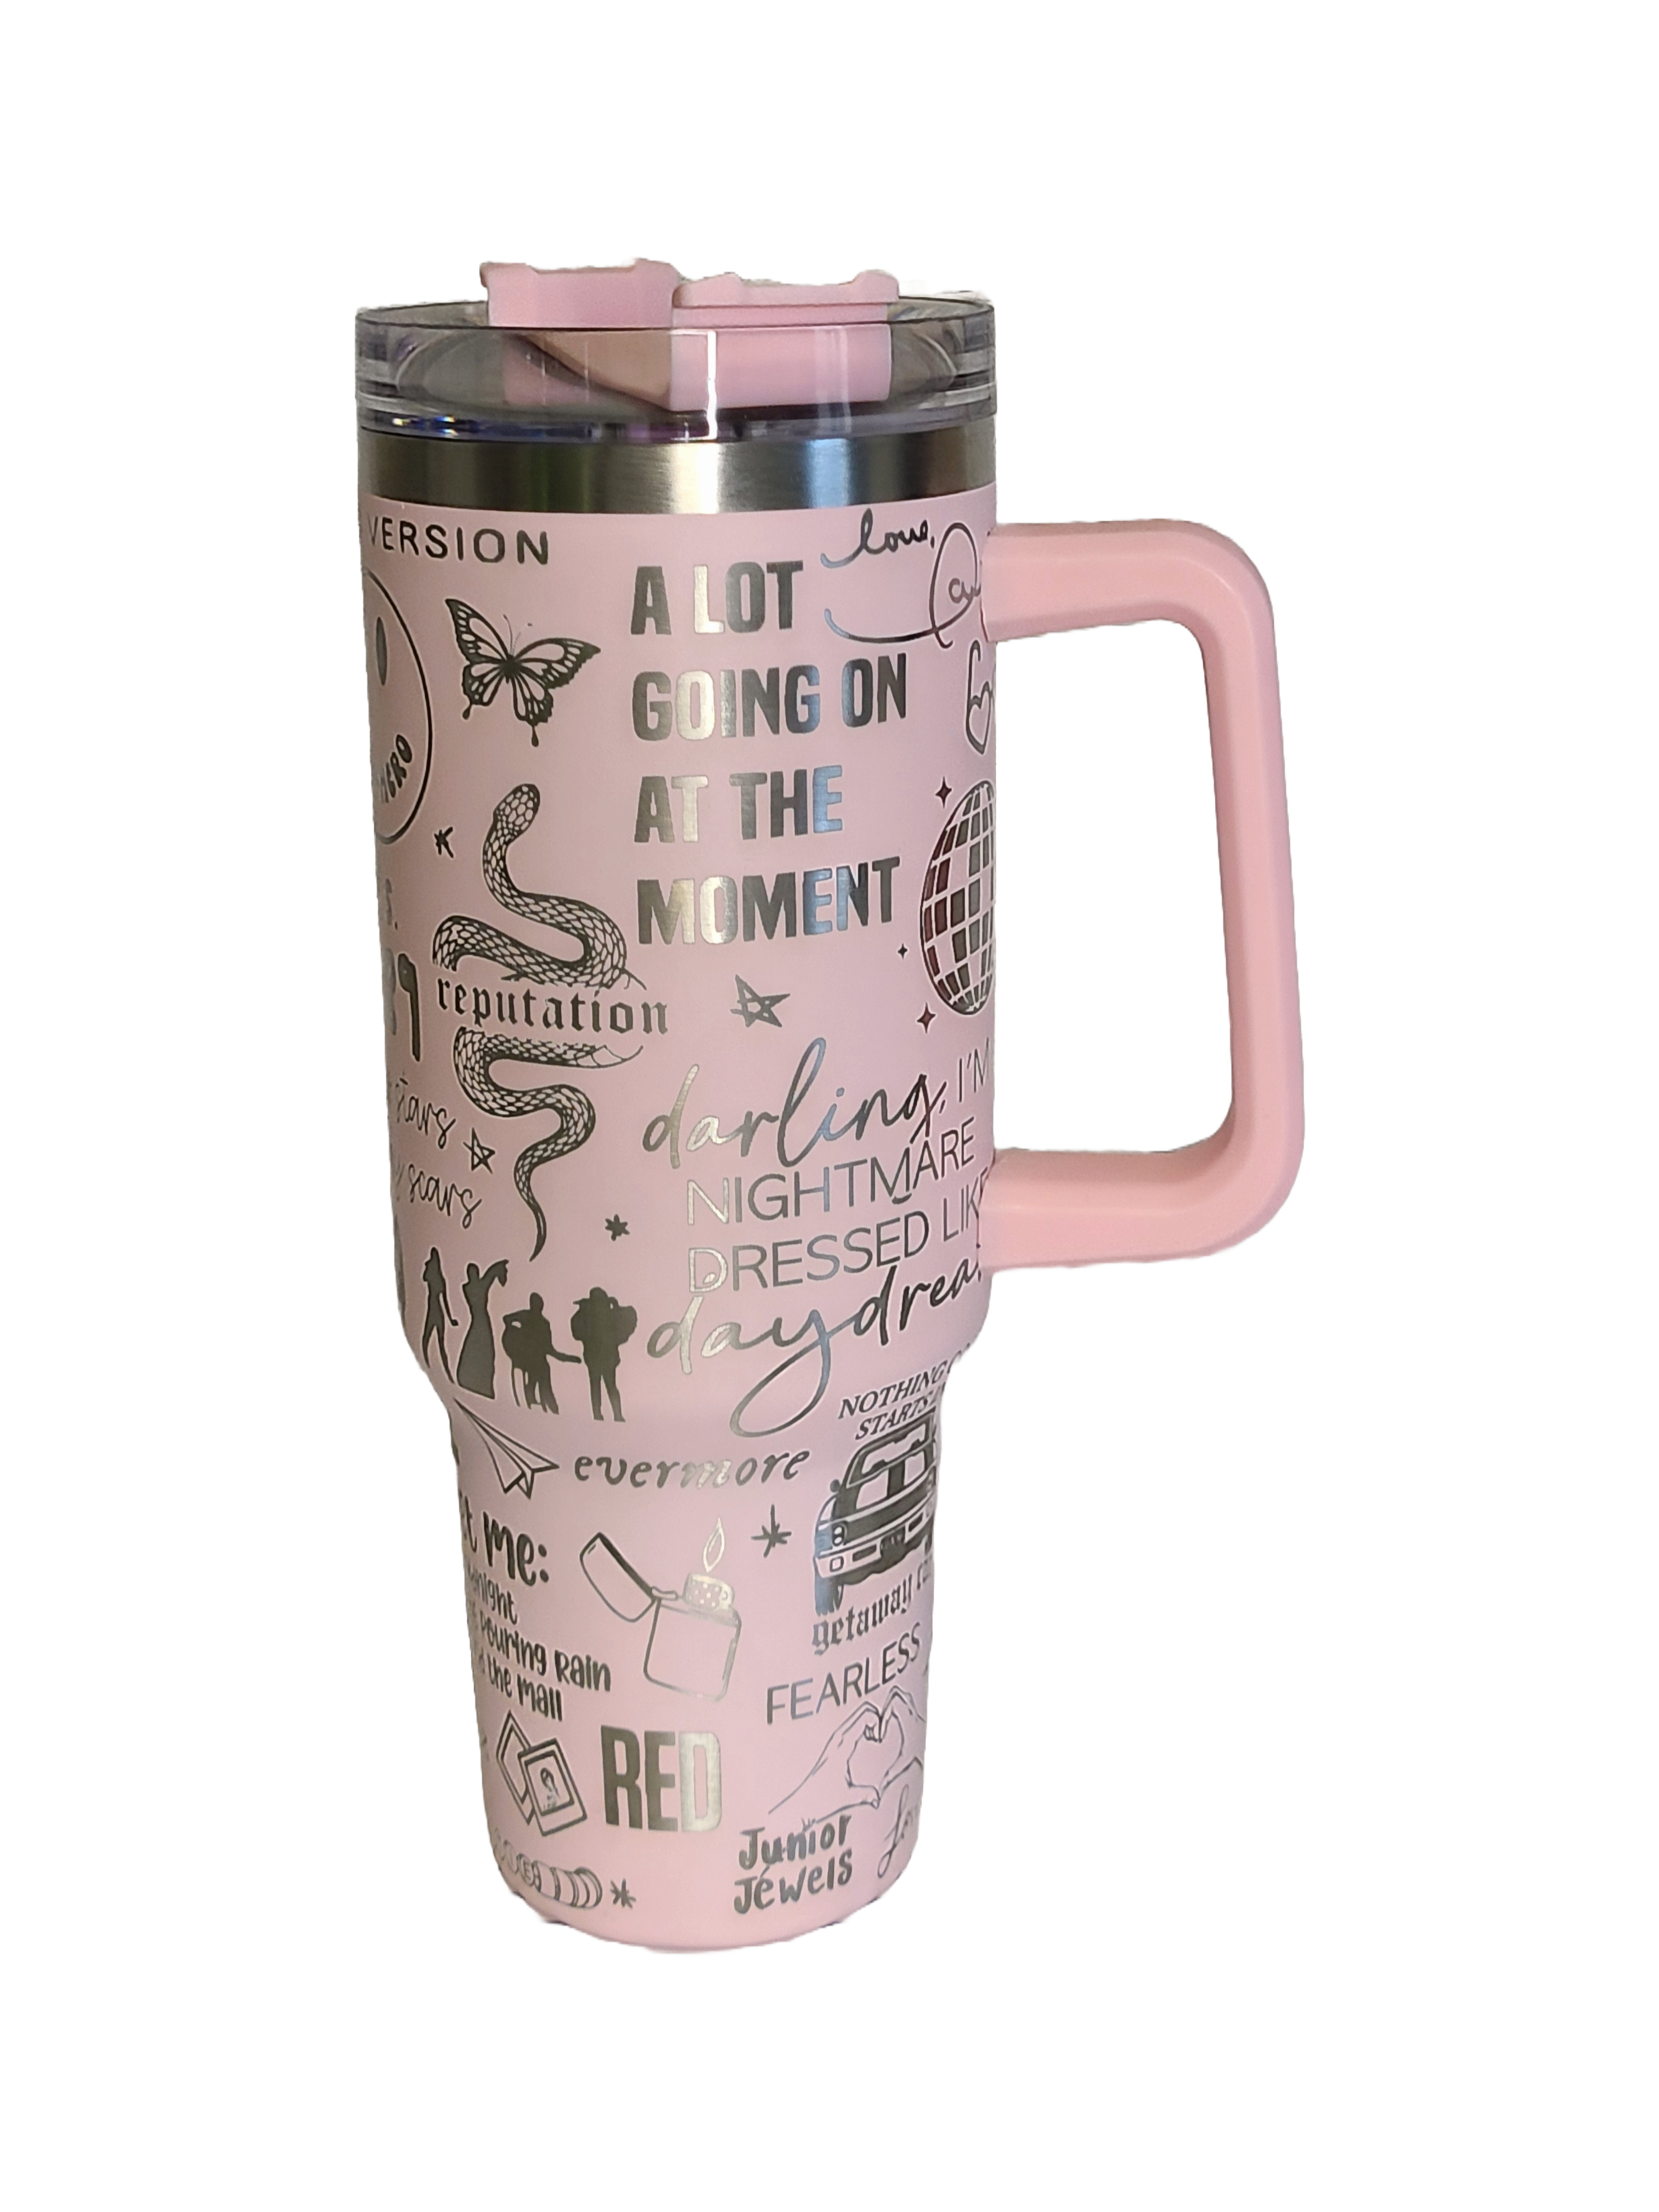 40 oz Stainless Steel Tumbler with Handle-"Taylor Swift" theme